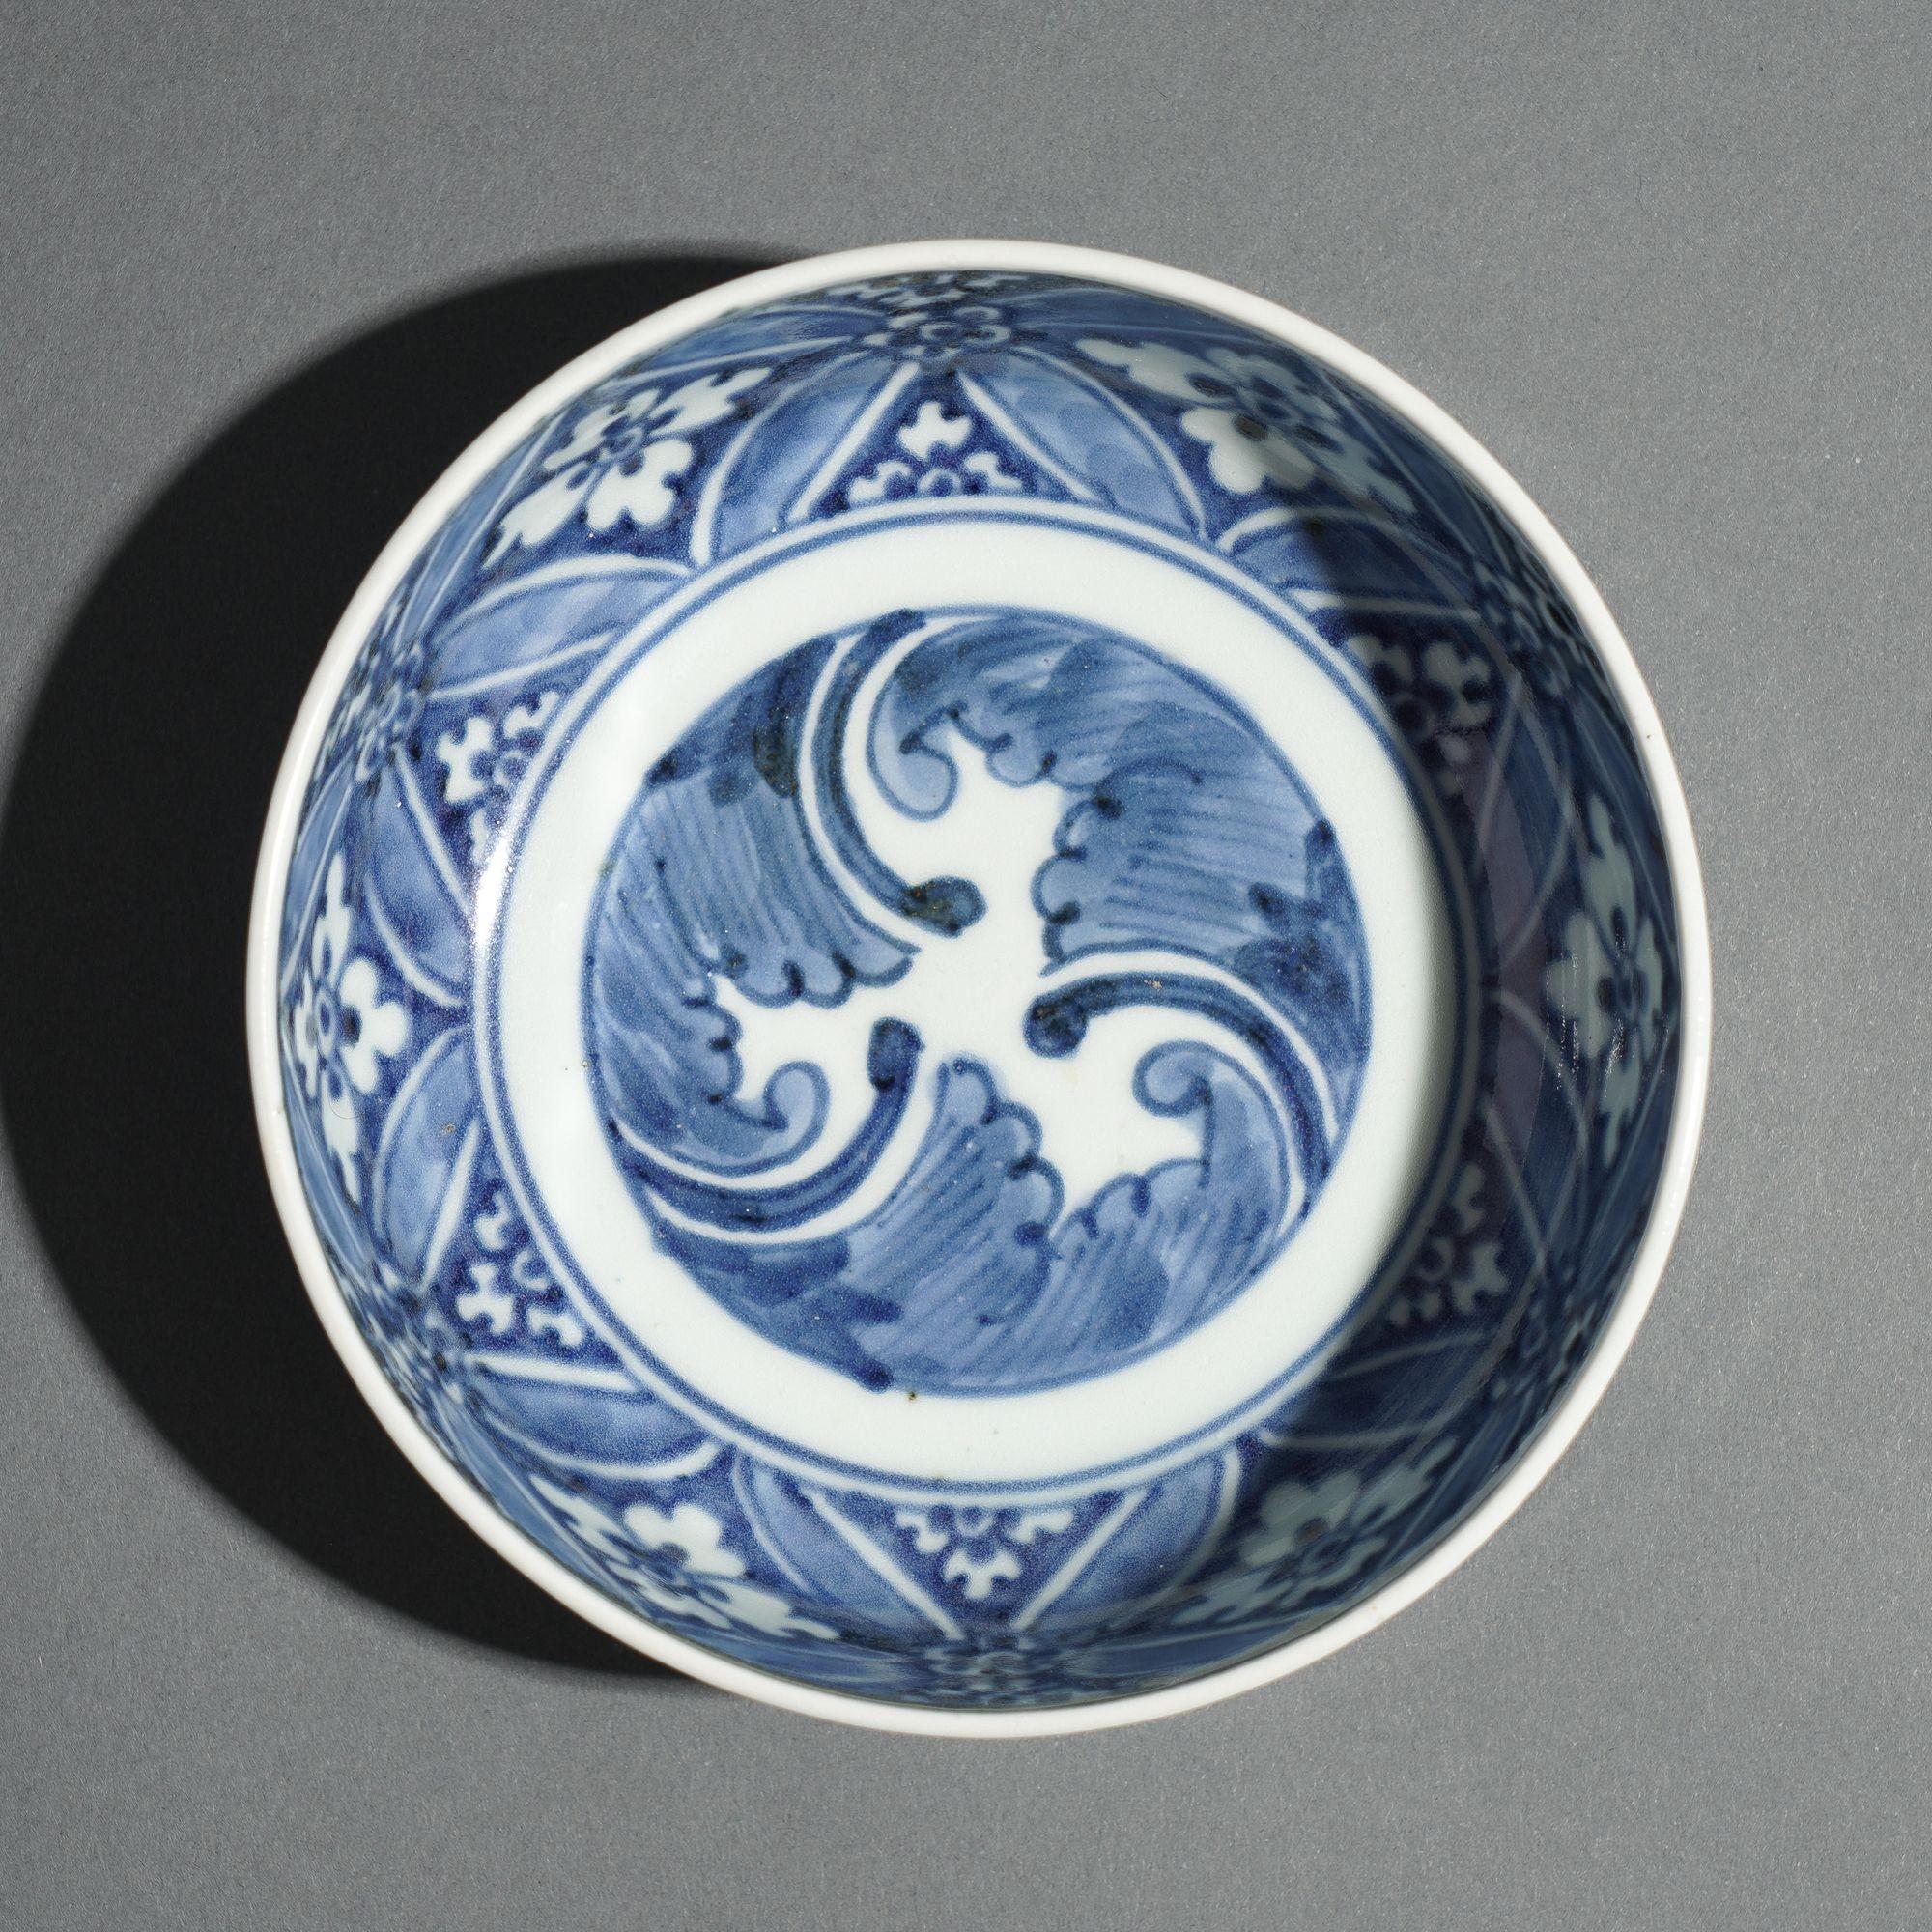 Traditional, vertical sided porcelain footed bowl with a bold diapered pattern in cobalt underglaze blue on the interior rim which centers on a swirling trefoil wave design. The exterior has a running vine around the circumference. The underfoot